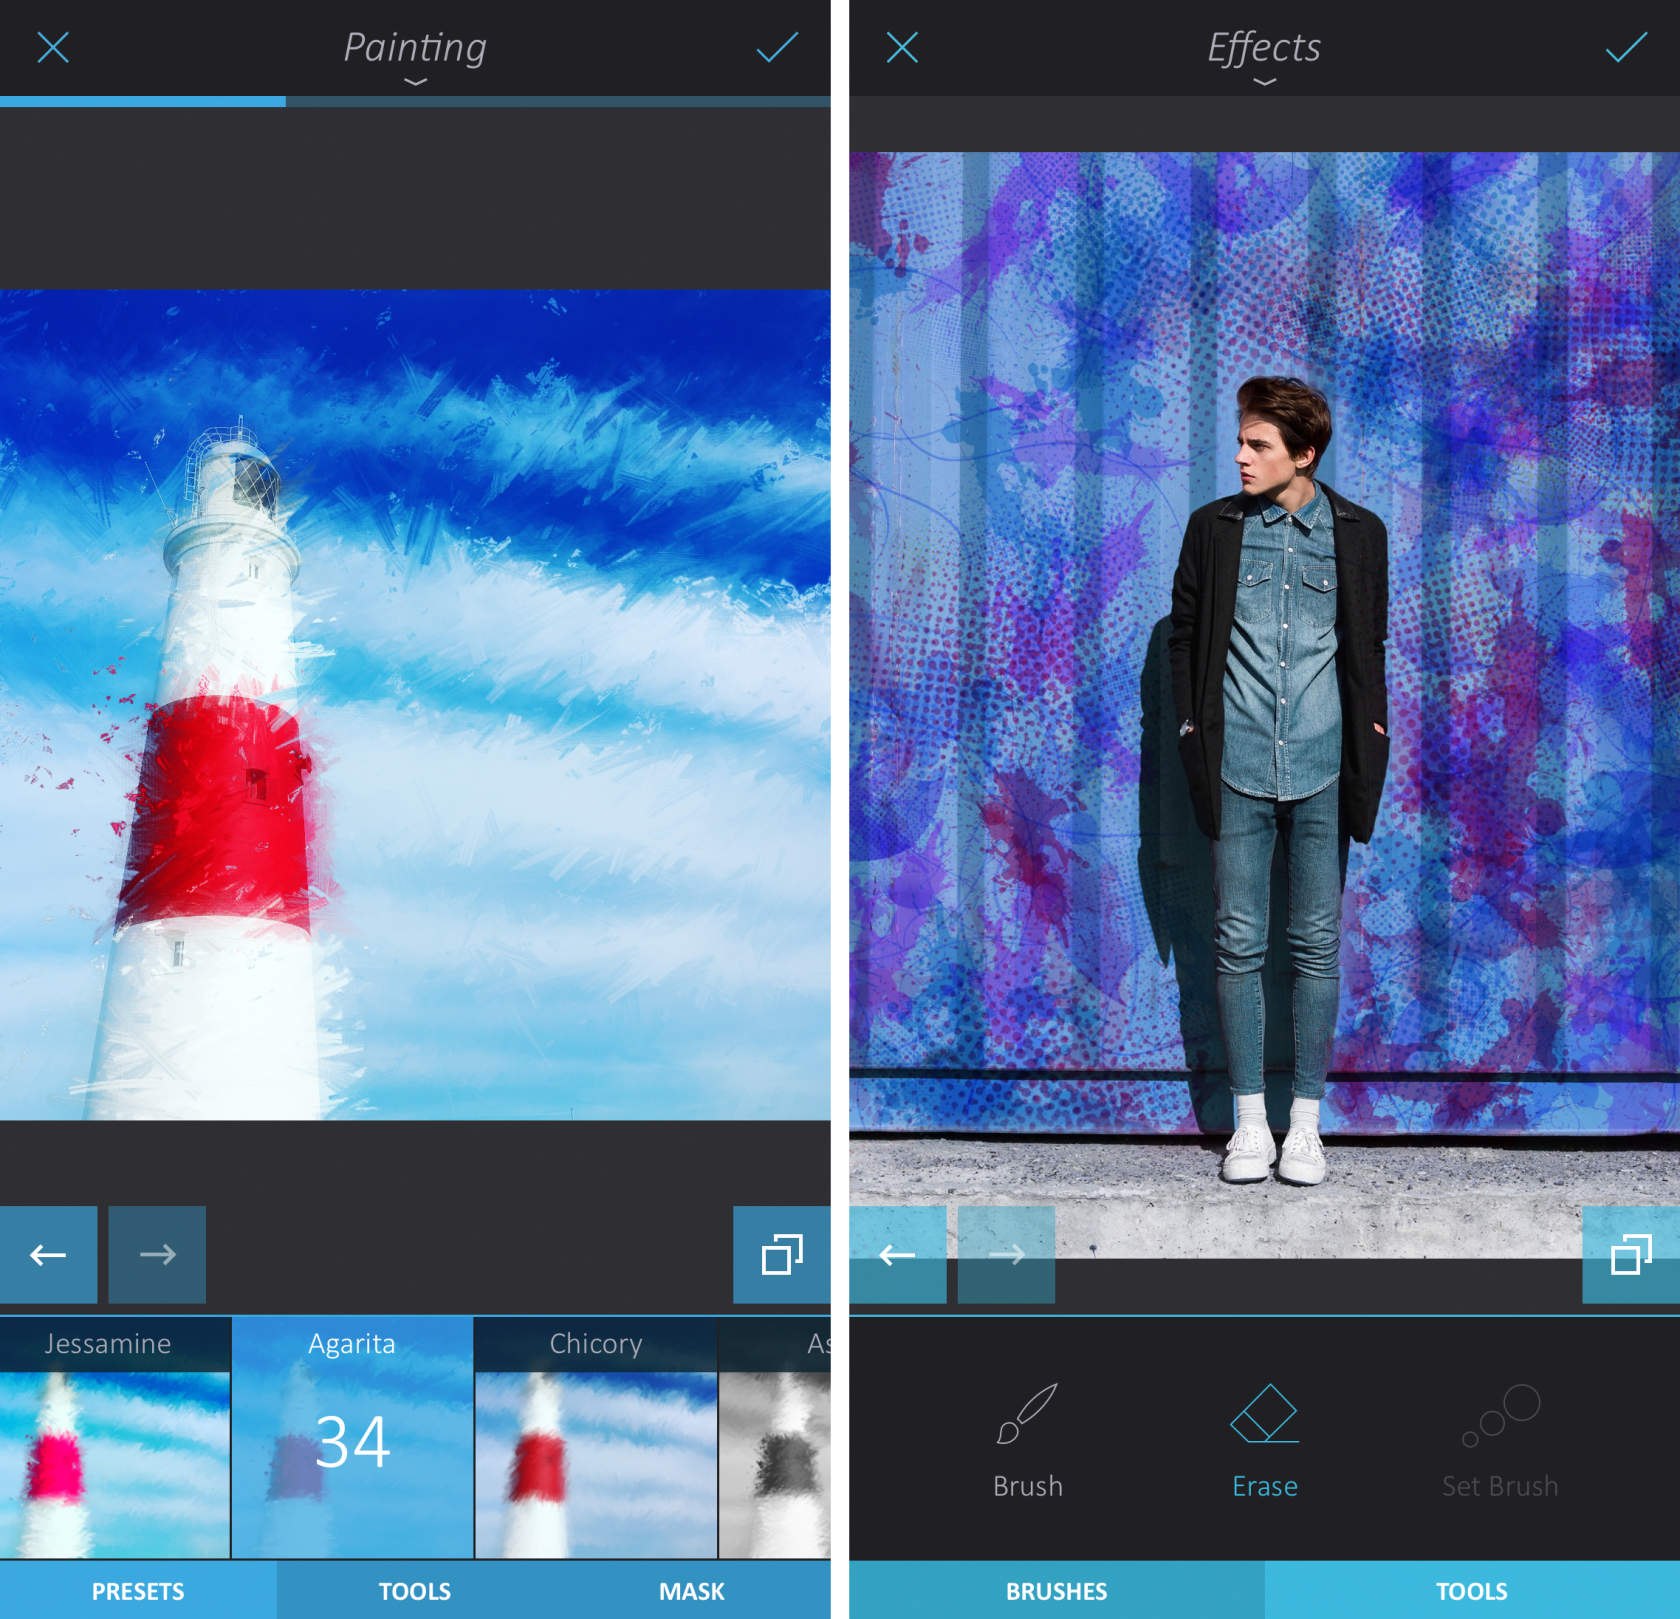 best app filters for photos